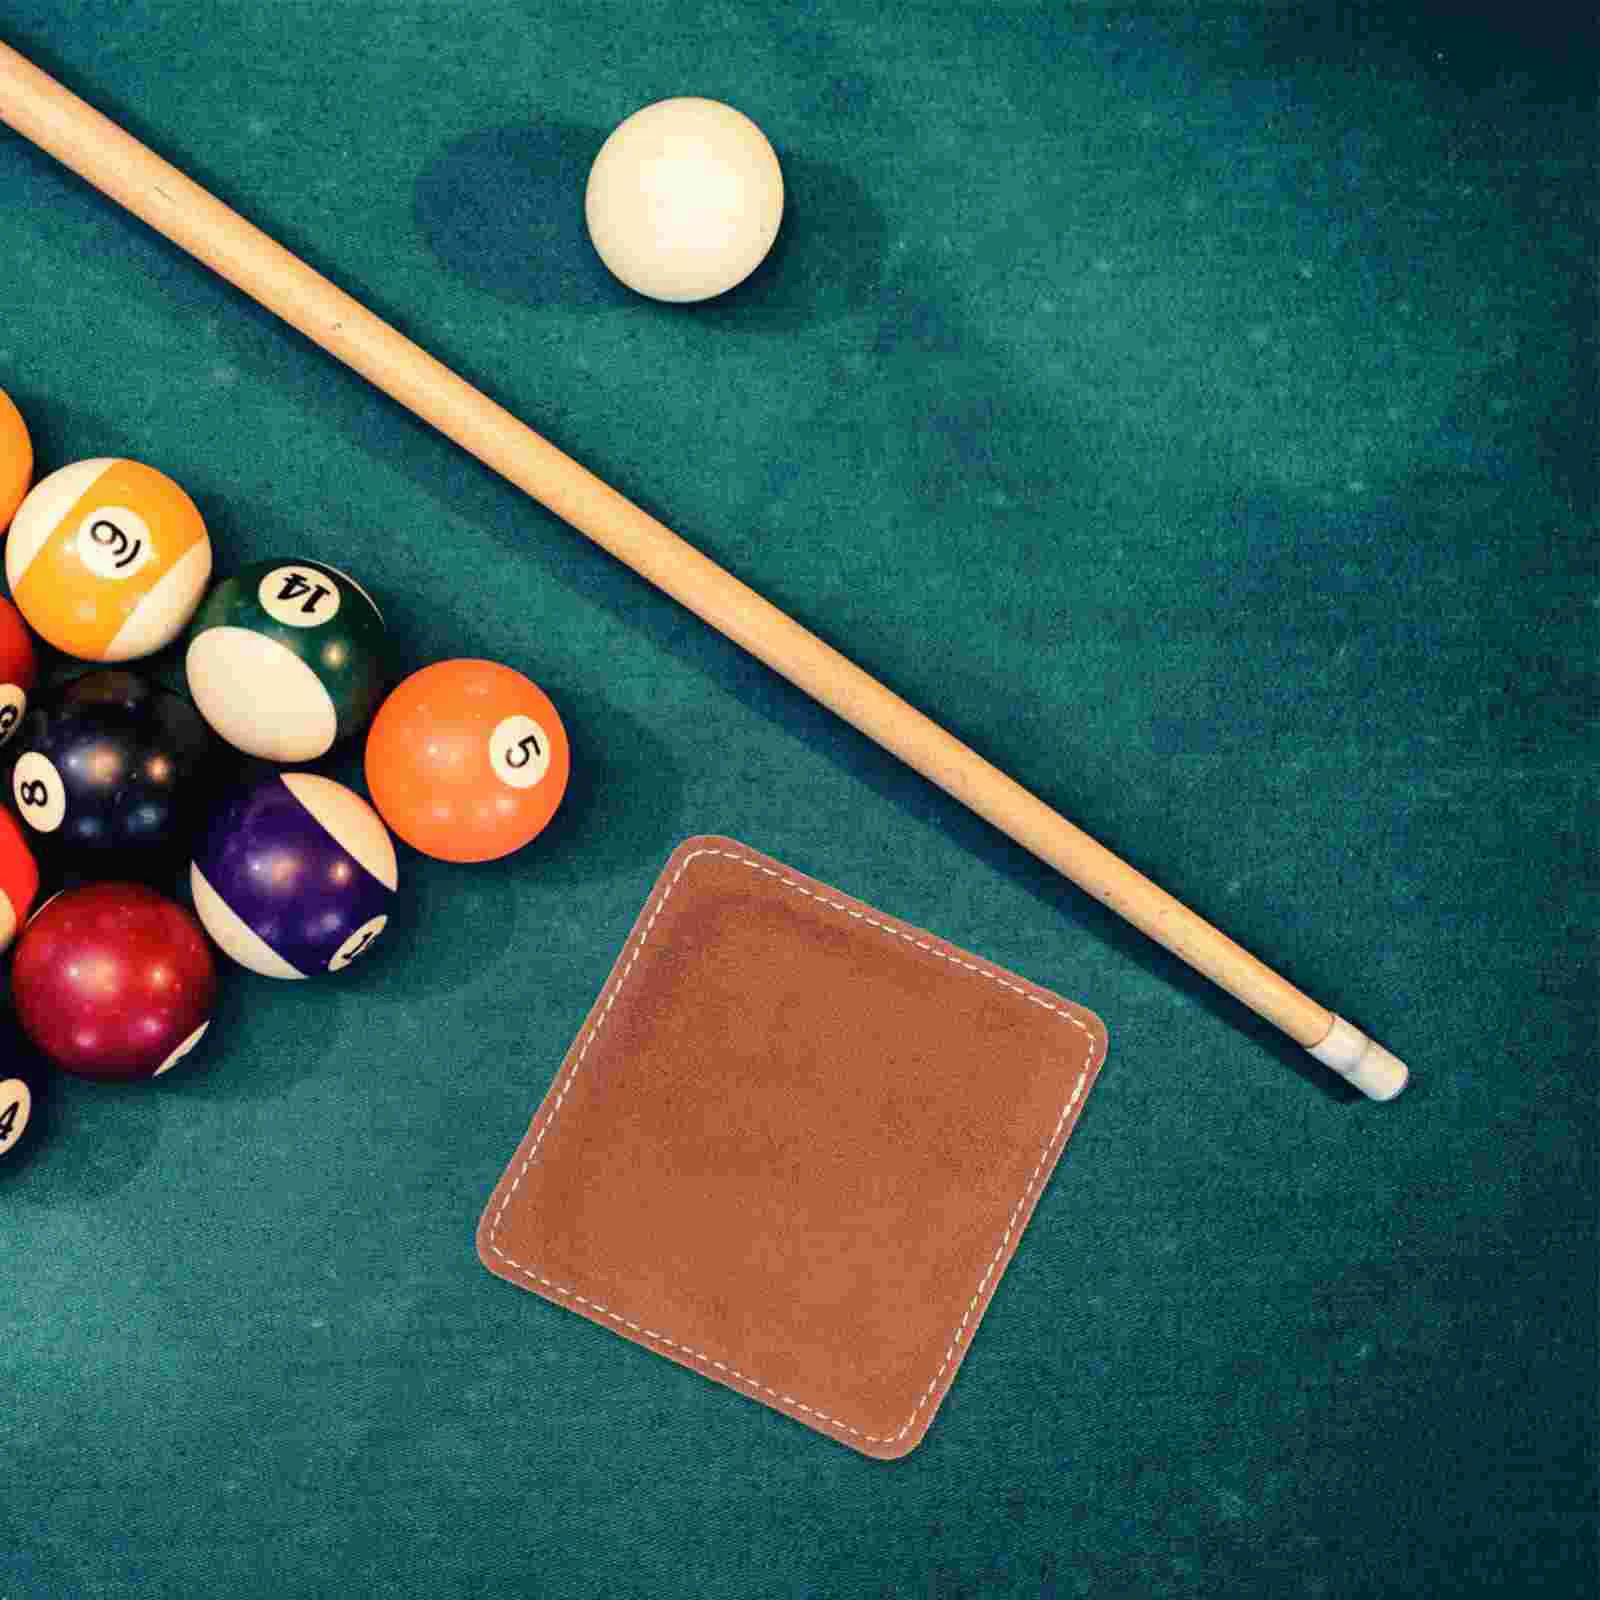 wipe the soft club rough on surface brown snooker stick towel towels pool cue accessories rough surface cleaning Wipe The Soft Club Rough on Surface (brown) Built God Tough Pool Stick Accessories Cue Shaft Polisher (rough Surface)